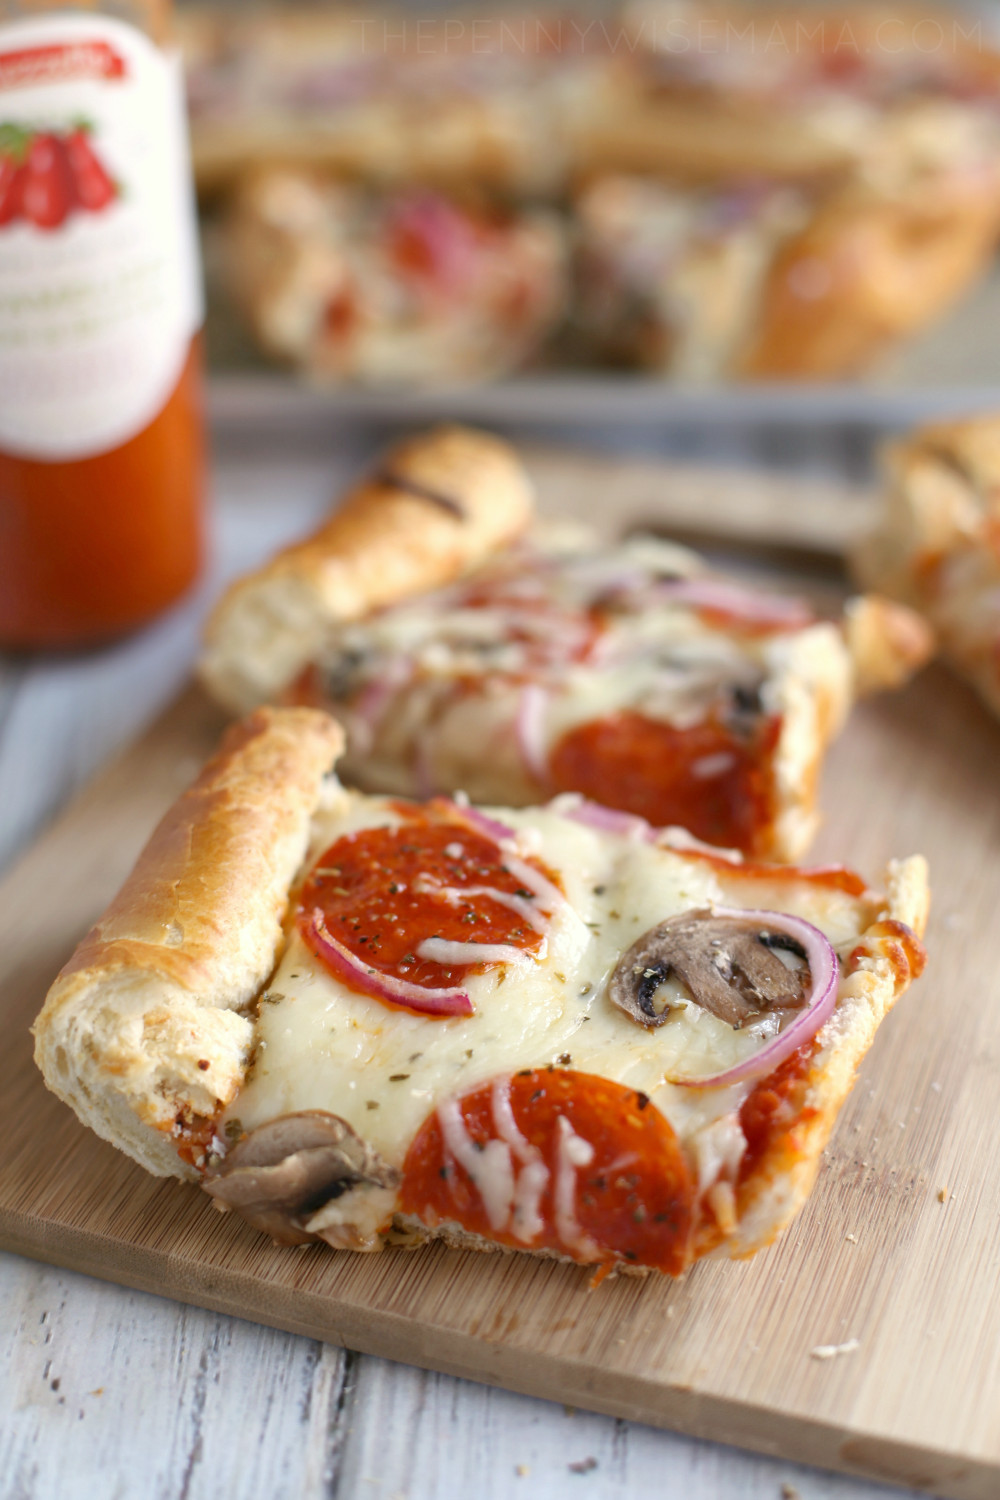 French Bread Pizza Recipe
 The Best French Bread Pizza Recipe The PennyWiseMama